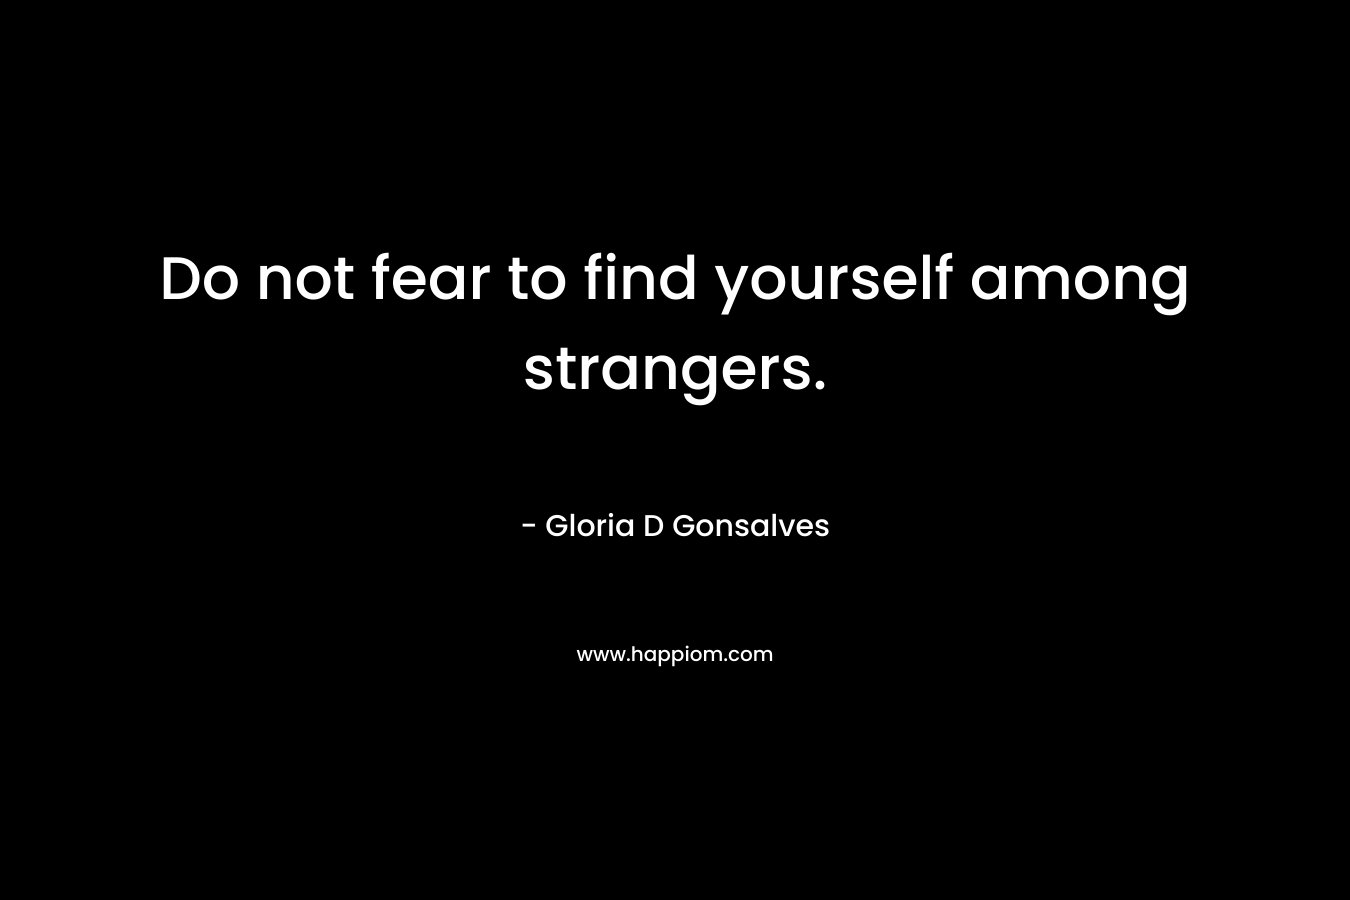 Do not fear to find yourself among strangers.